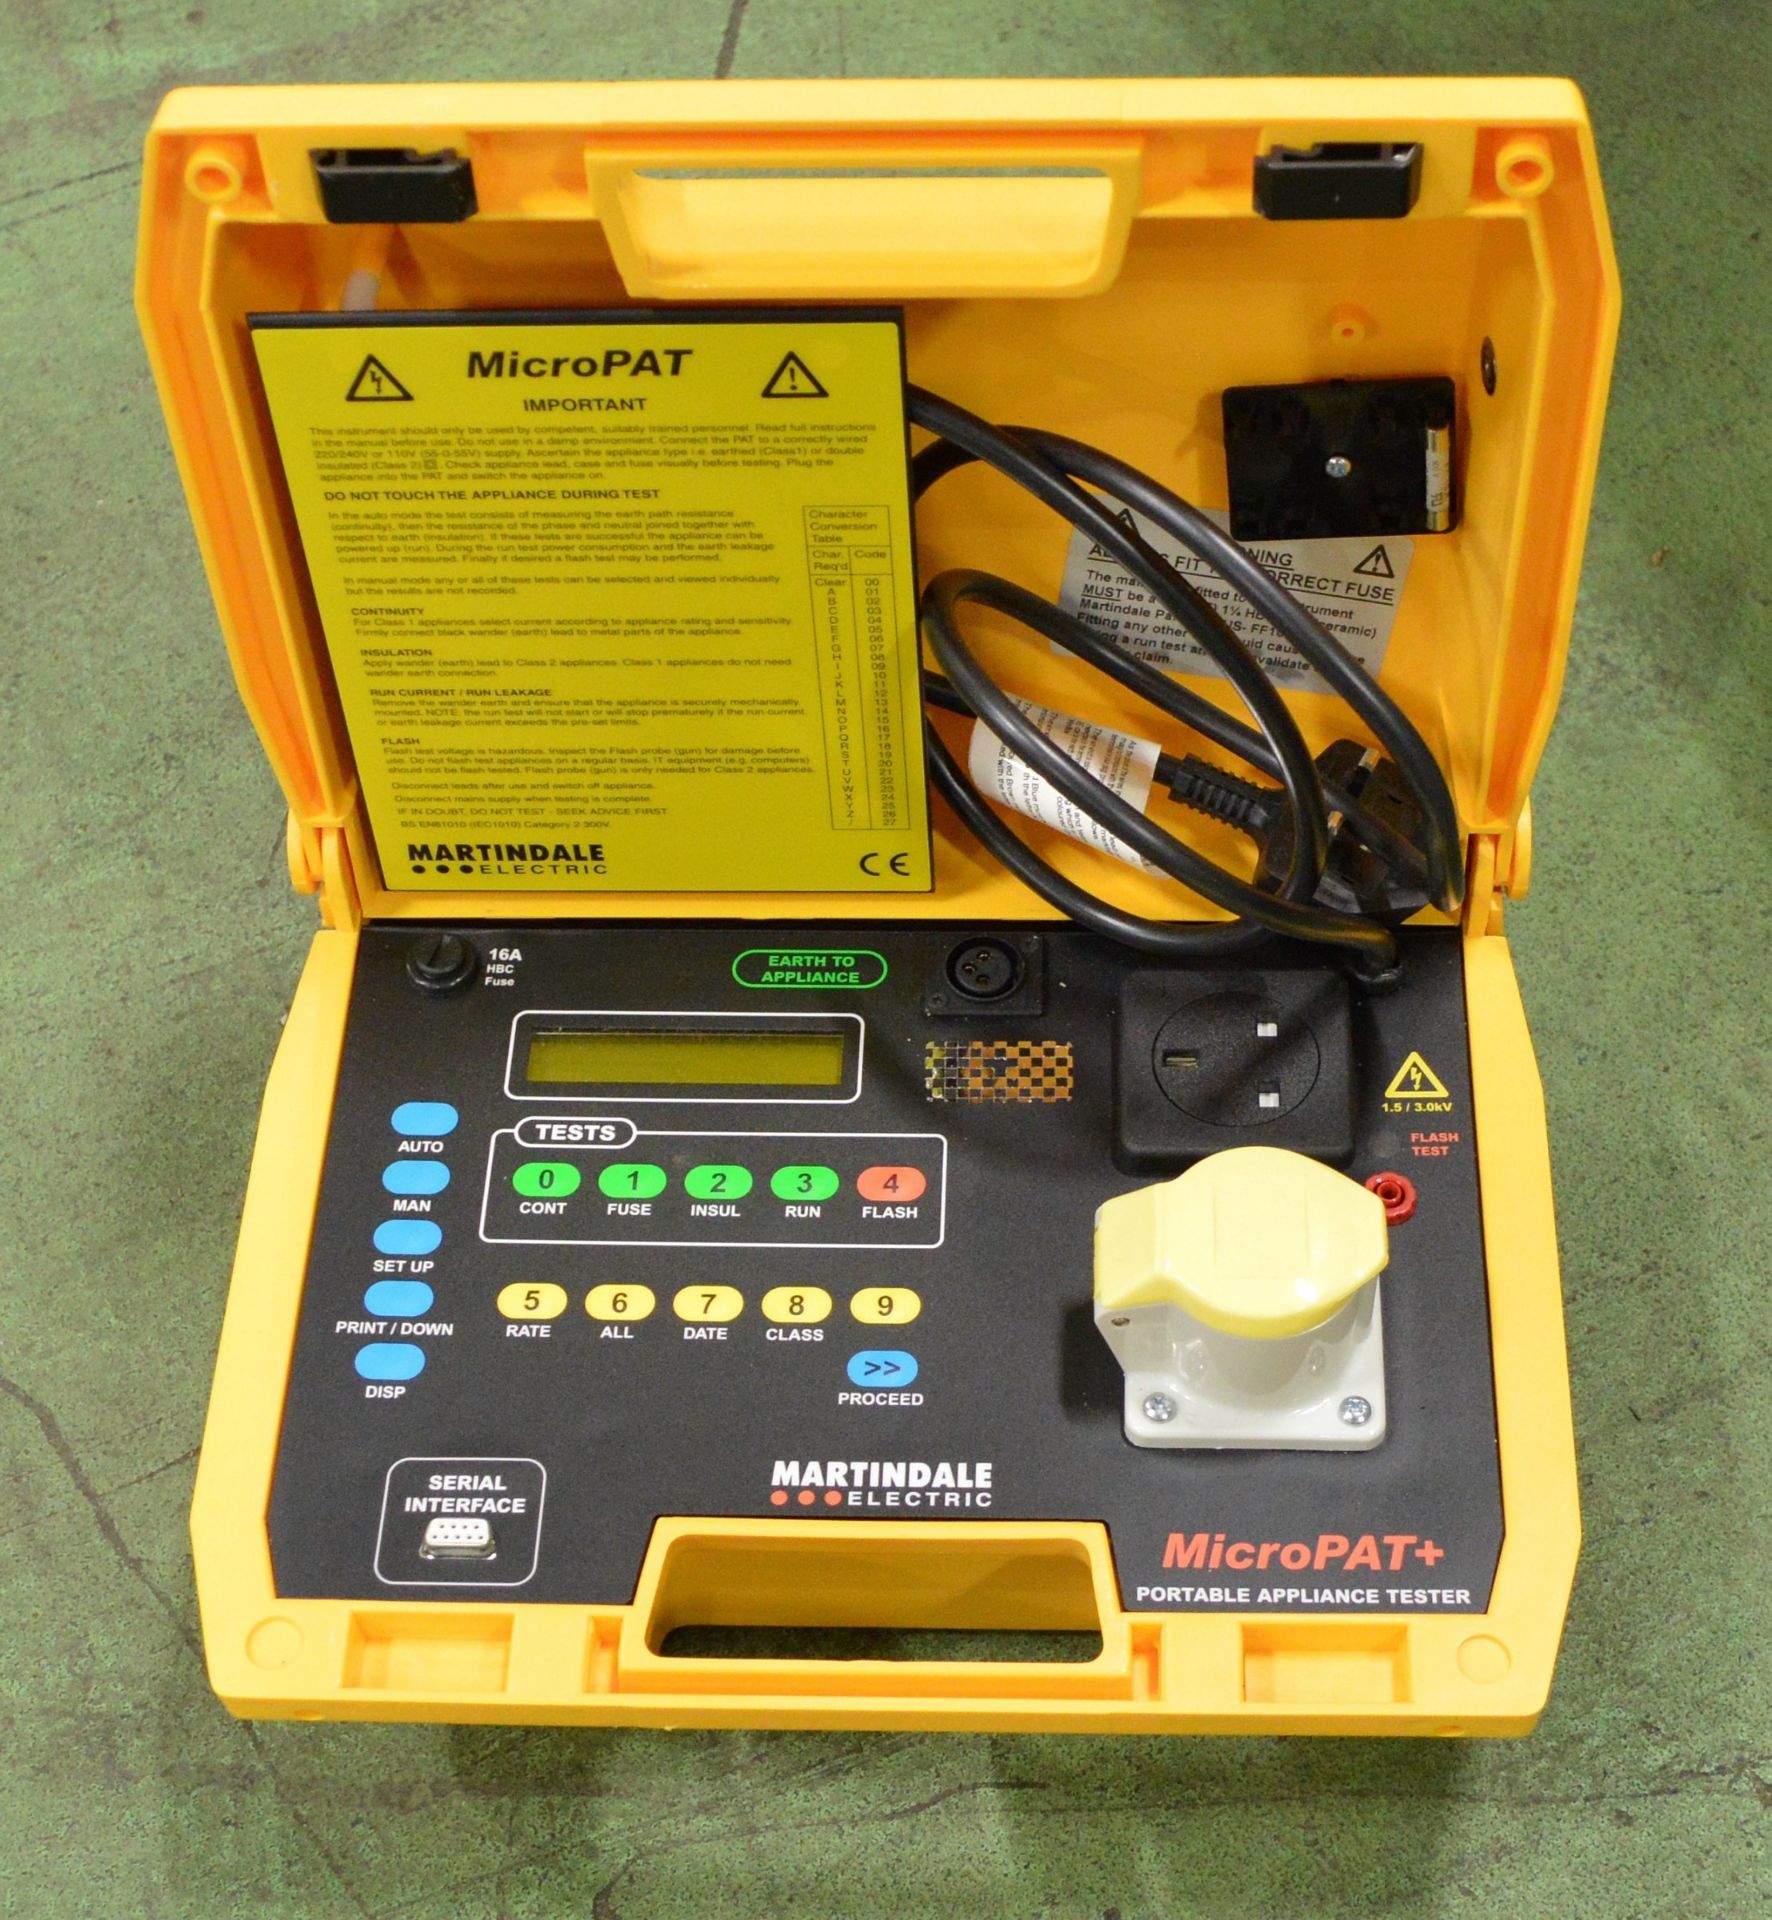 Martindale Portable MicroPat Appliance Tester - Image 2 of 3